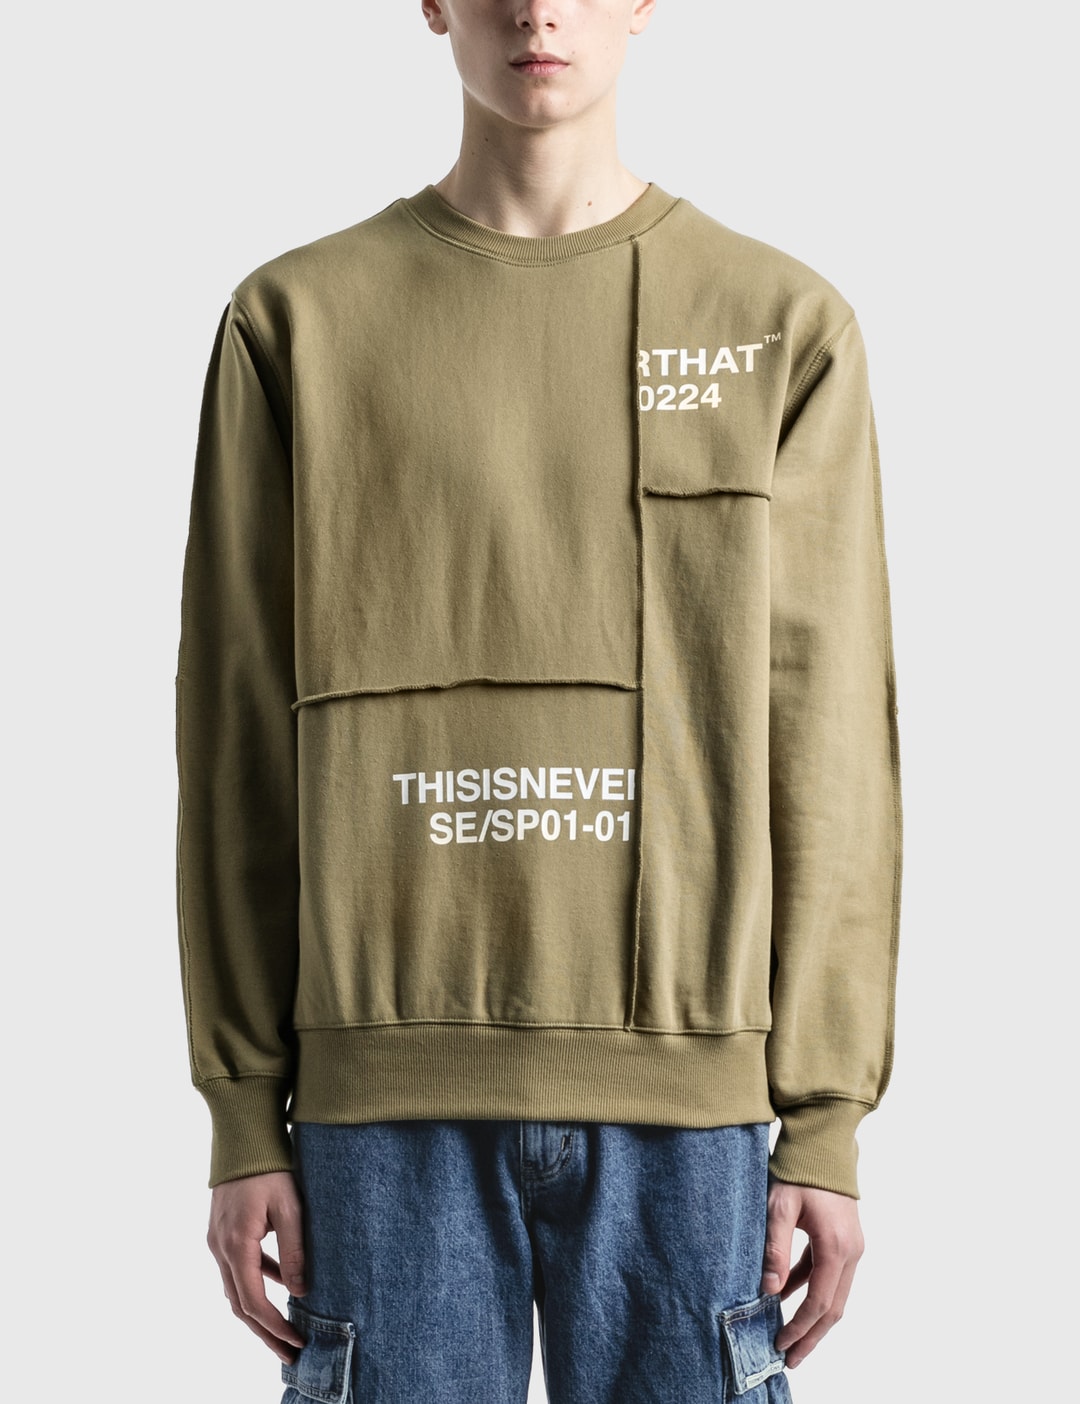 thisisneverthat® - Cut & Sew Panel Crewneck | HBX - Globally Curated ...